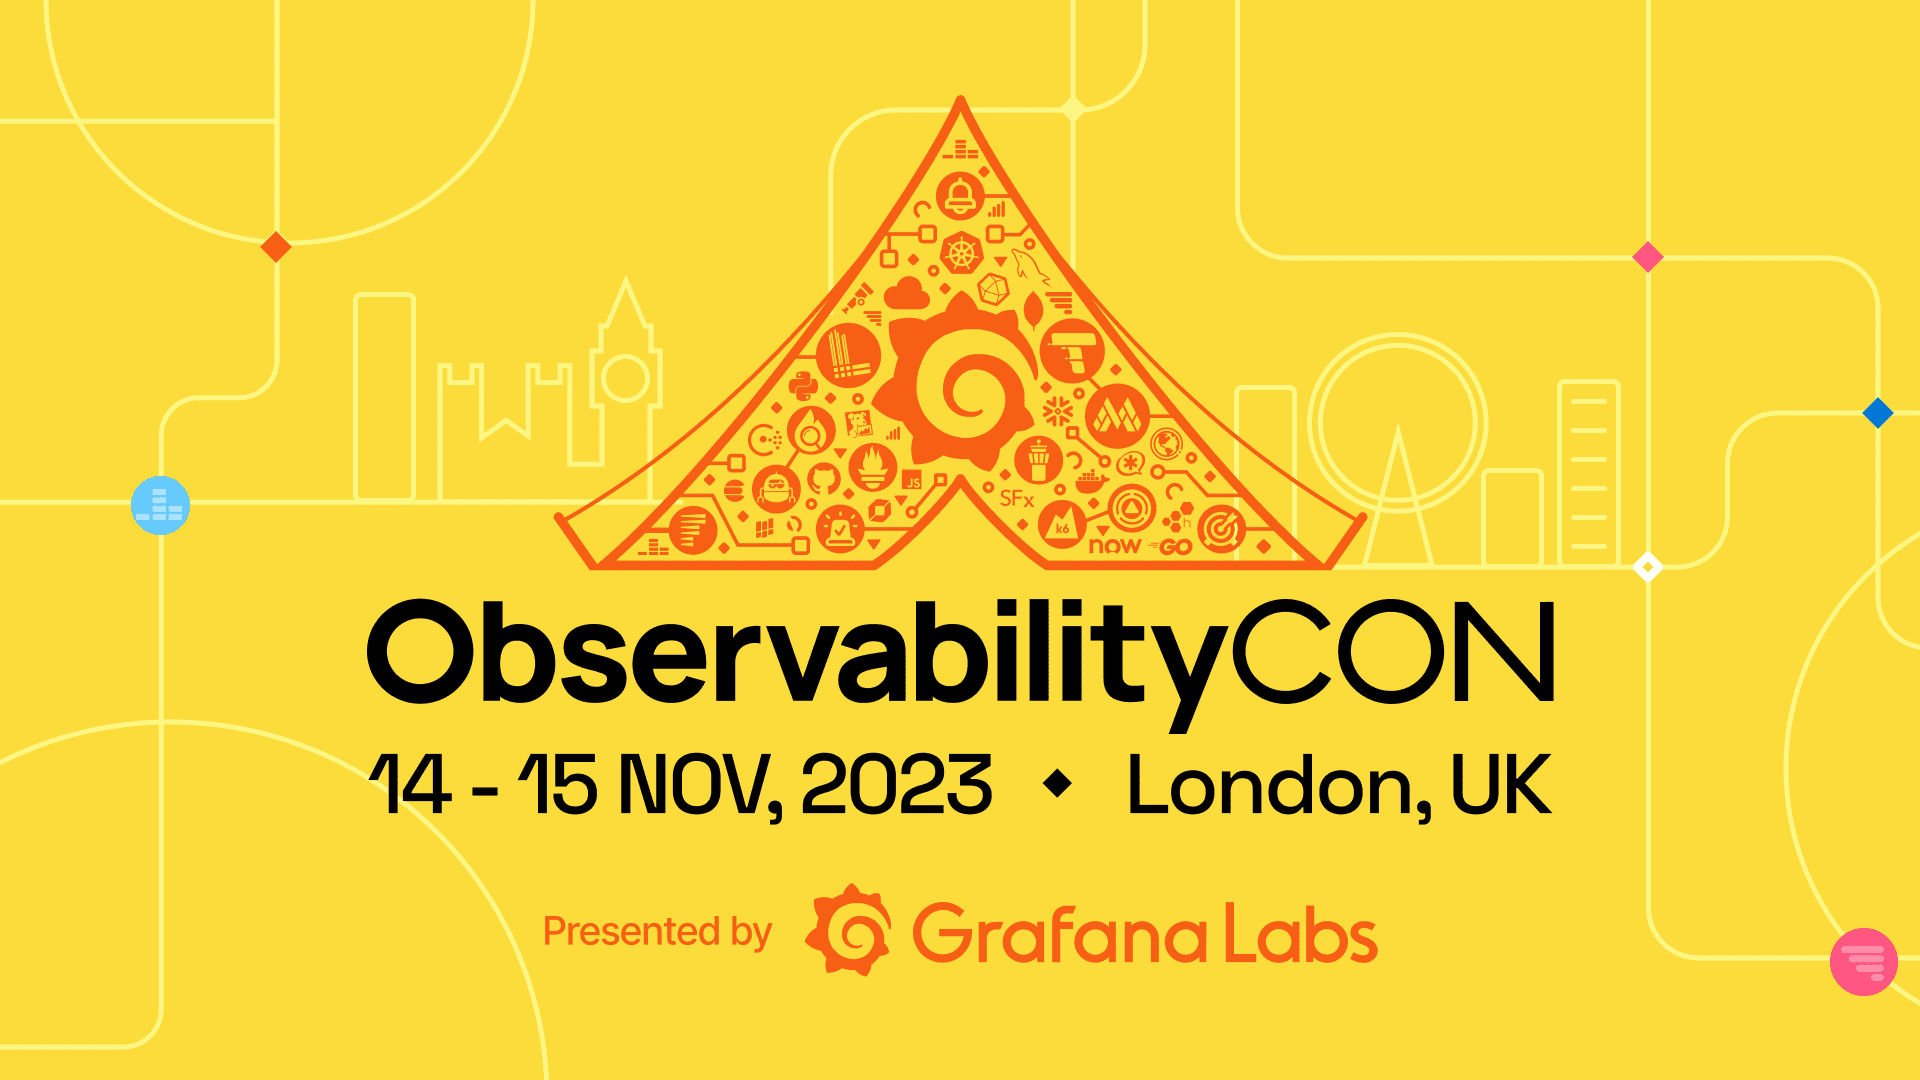 The title card for ObservabilityCON 2023